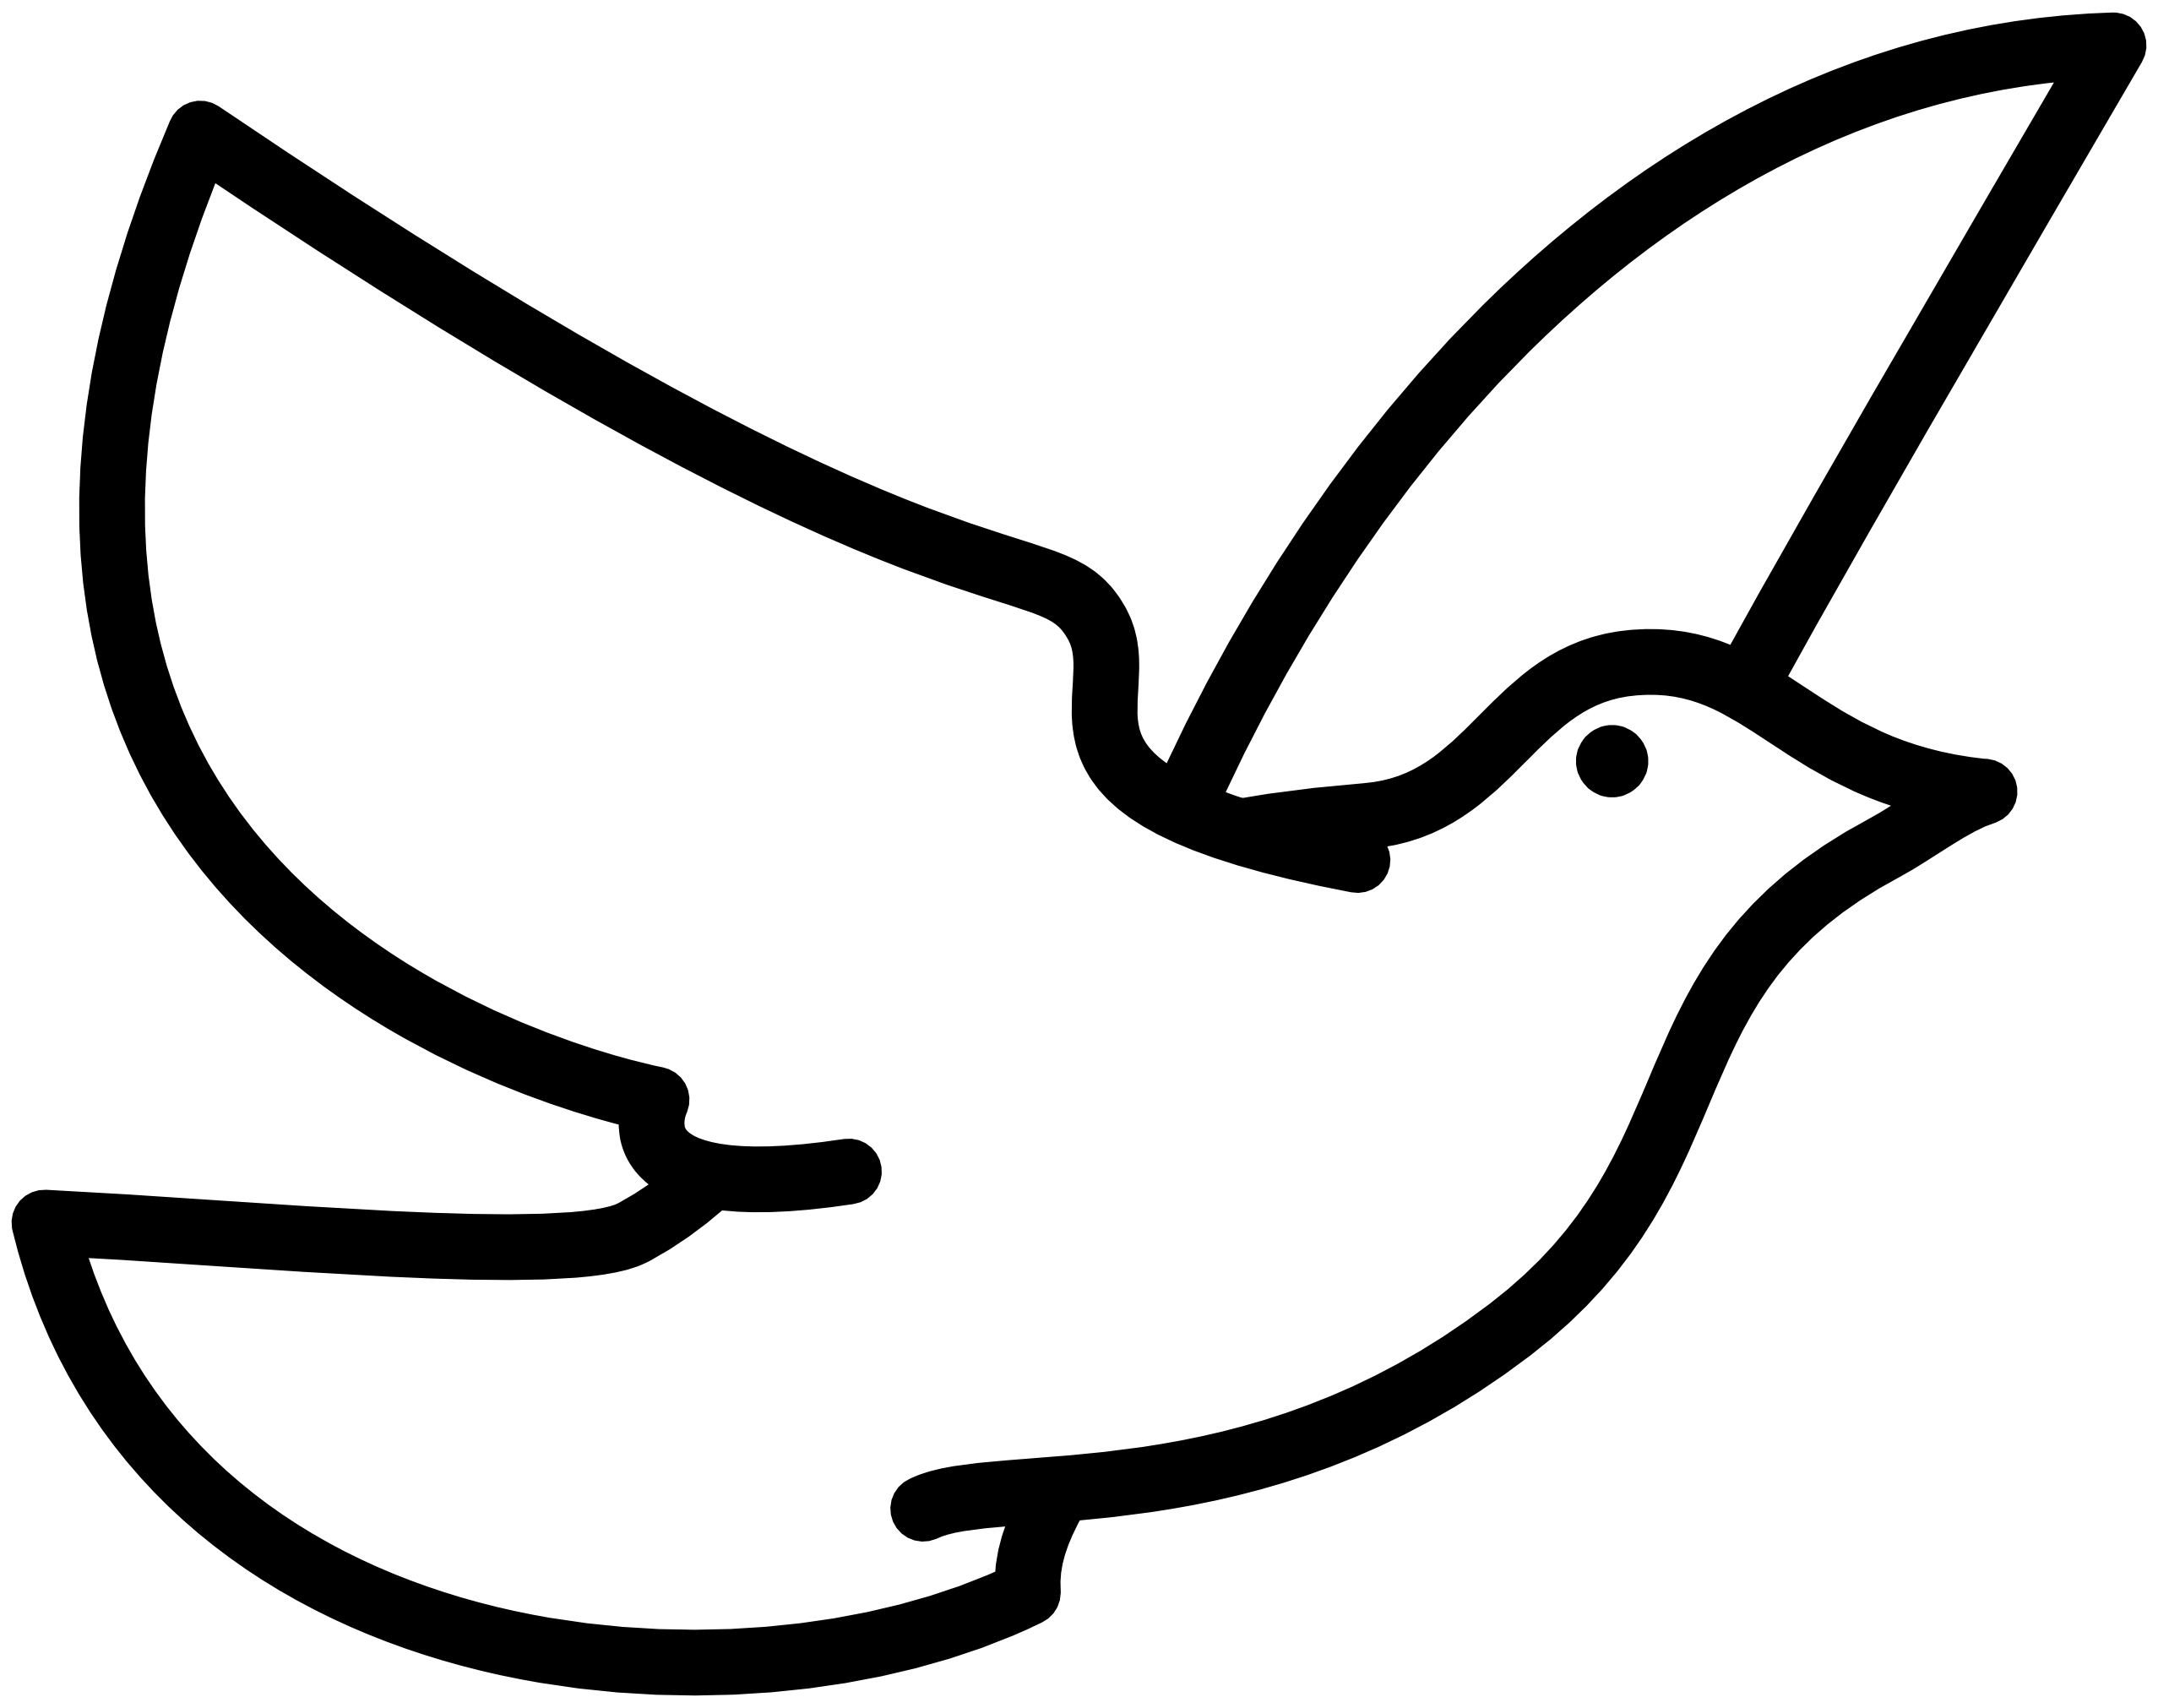 Dove Clipart Black And White - ClipArt Best